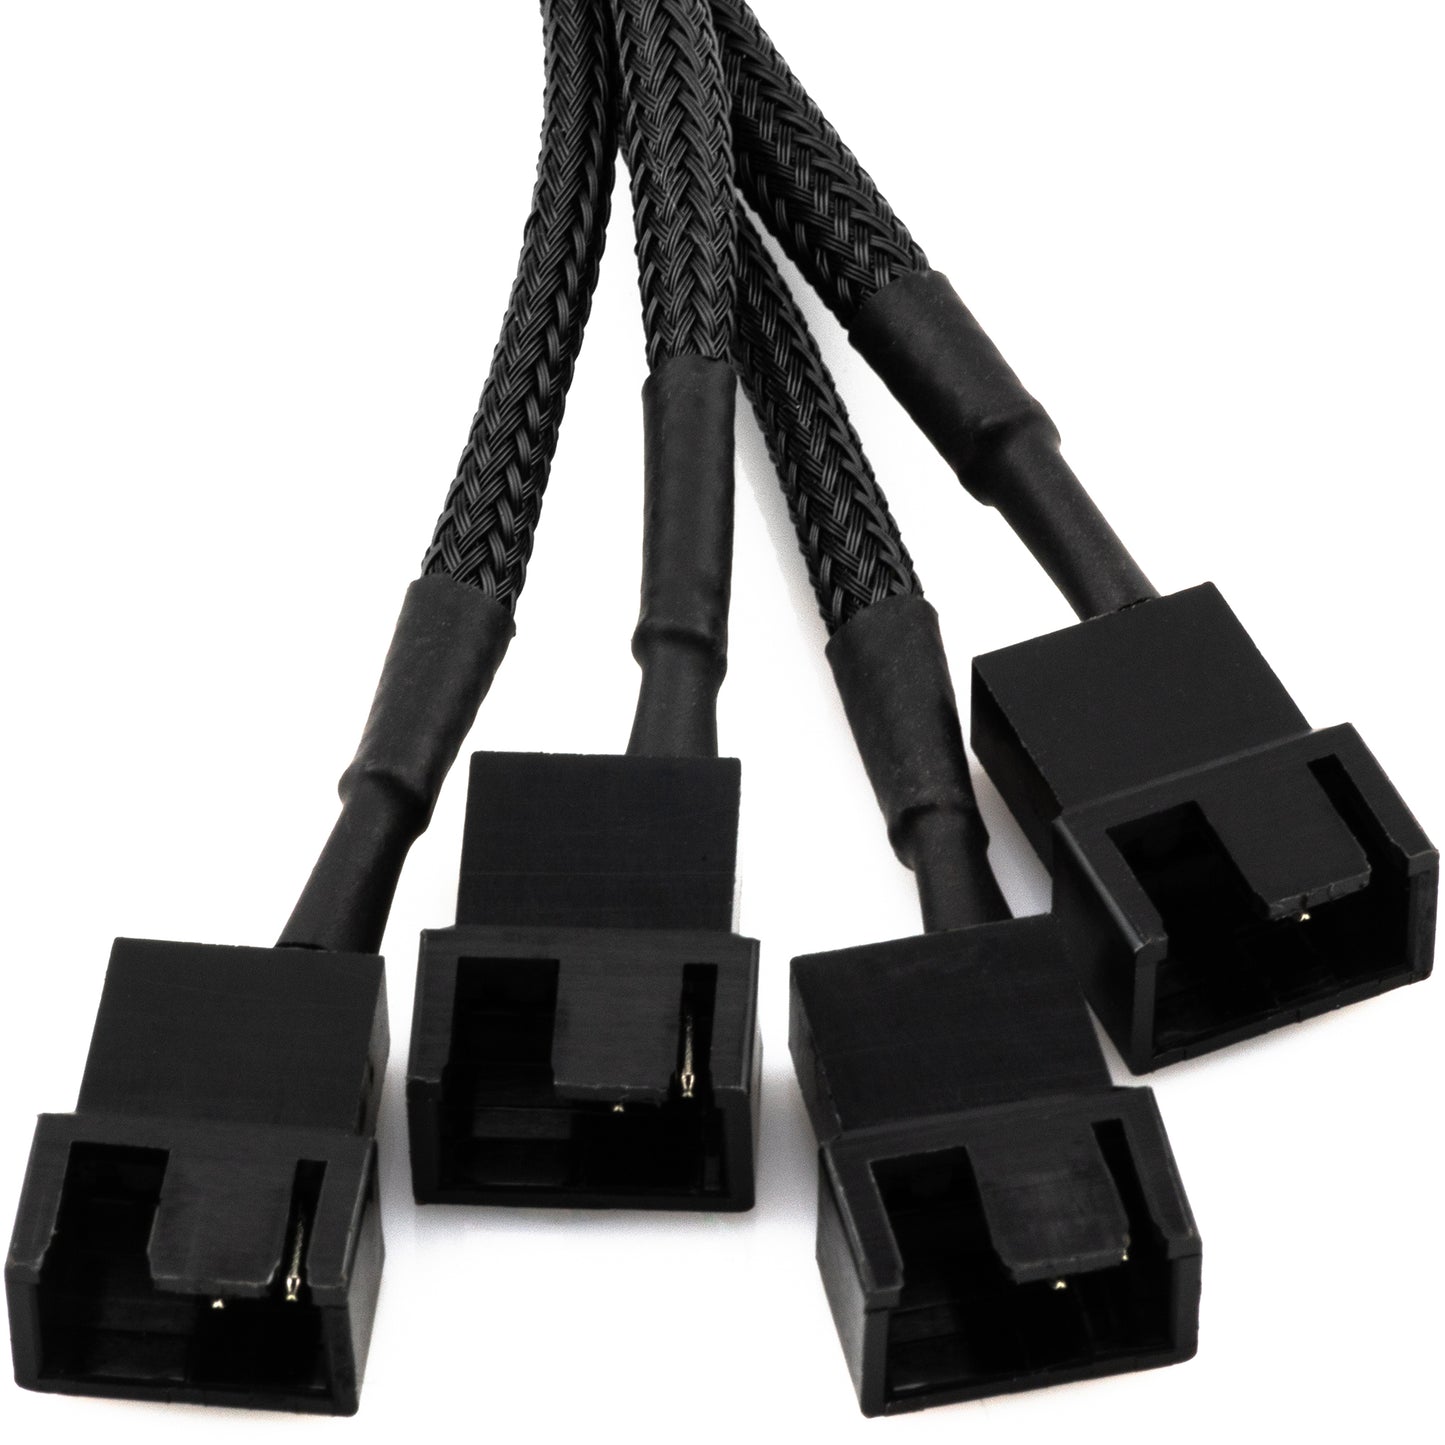 15-Pin SATA to Four 4-Pin Fan 12V Power Adapter Cable